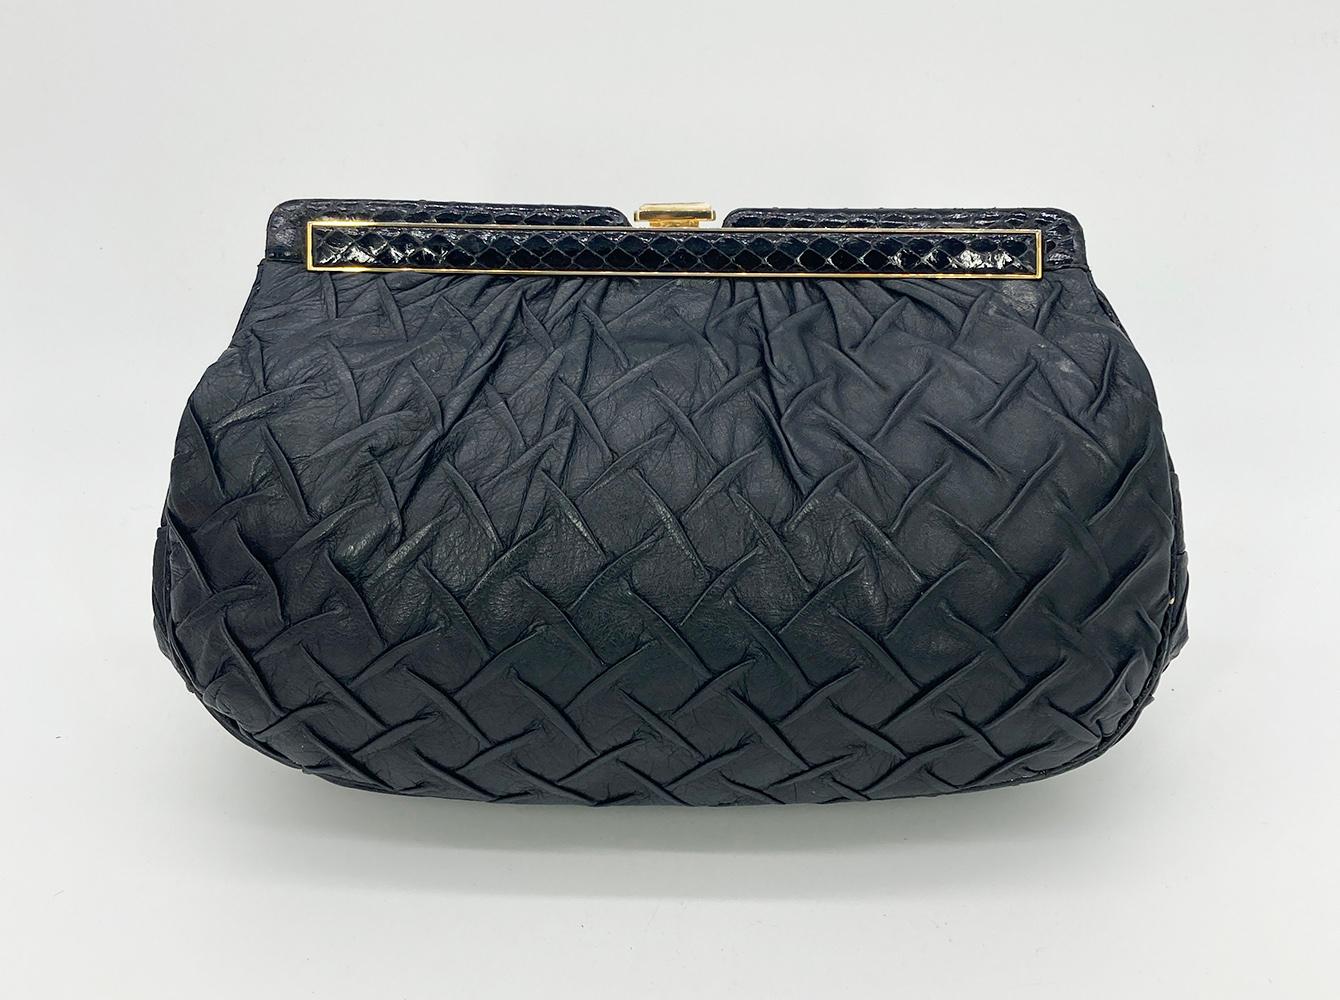 Judith Leiber Black Pleated Leather Resin Bone Top Clutch in very good condition. Black soft lambskin exterior in unique crisscross pinch pleated design trimmed with gold hardware, black snakeskin and distressed resin bone accent along top edge. Top